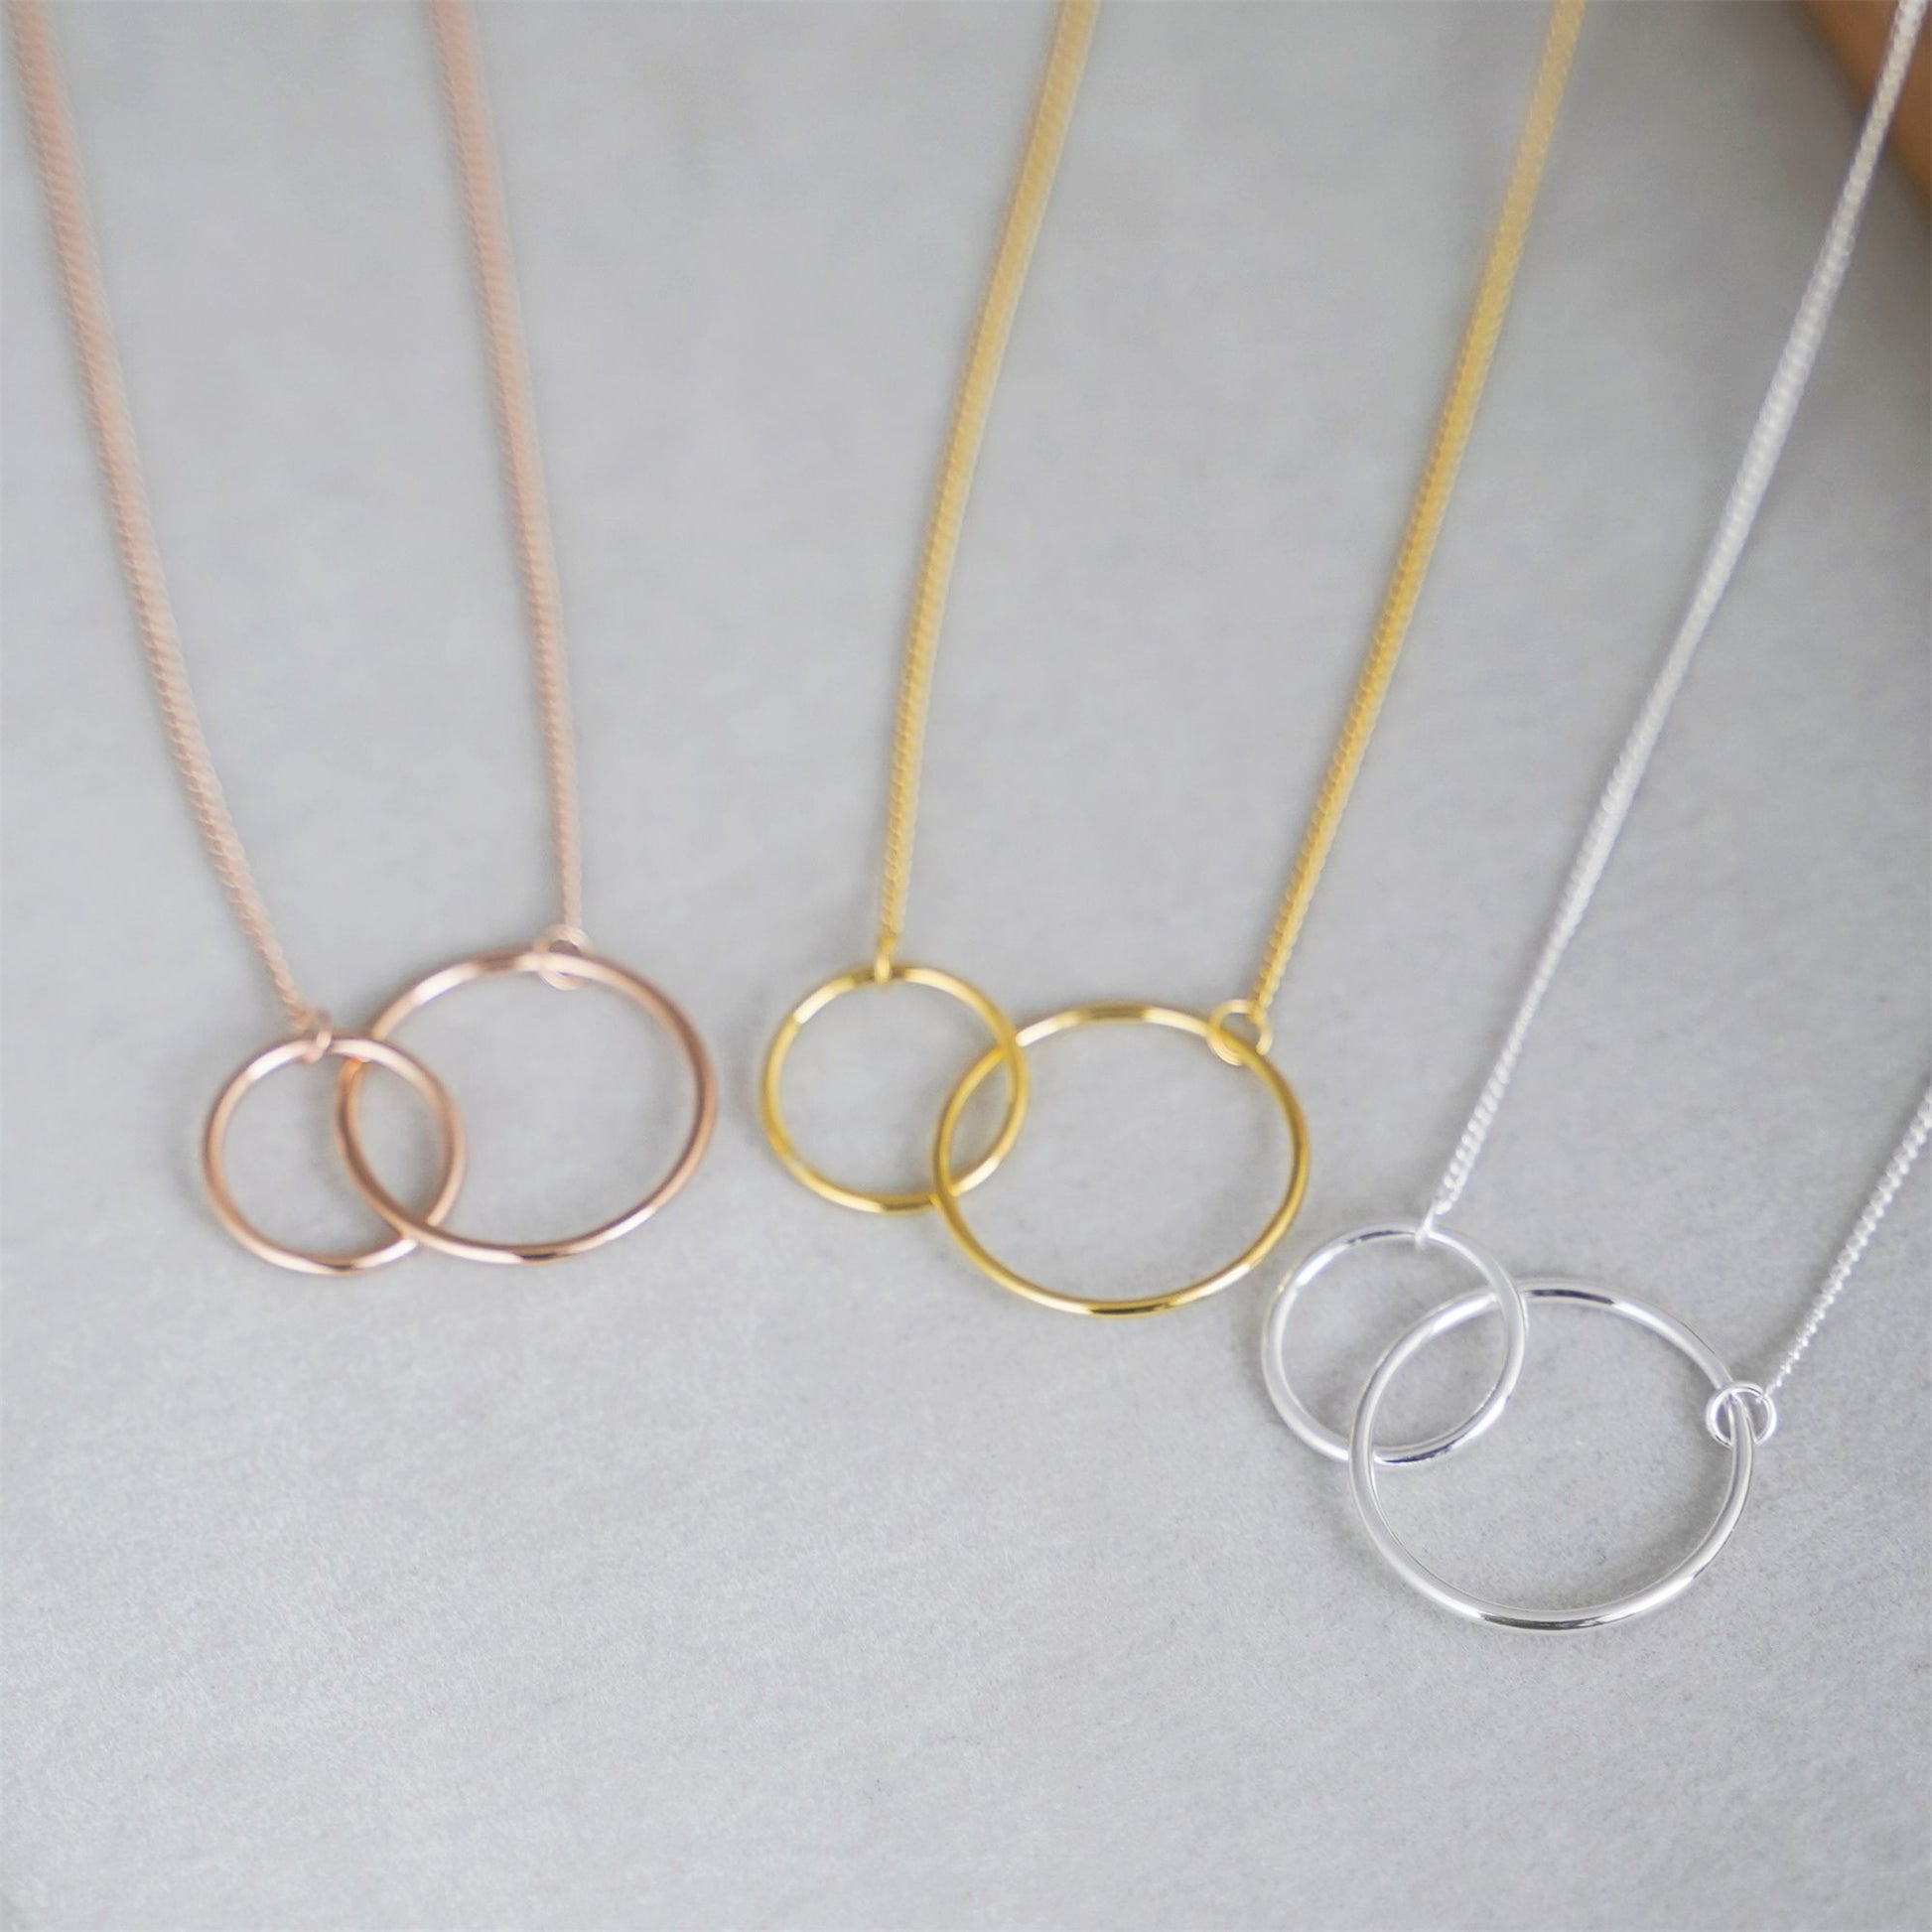 Linked Circles Eternity Infinity Necklace in Sterling Silver (3 Tones) - sugarkittenlondon